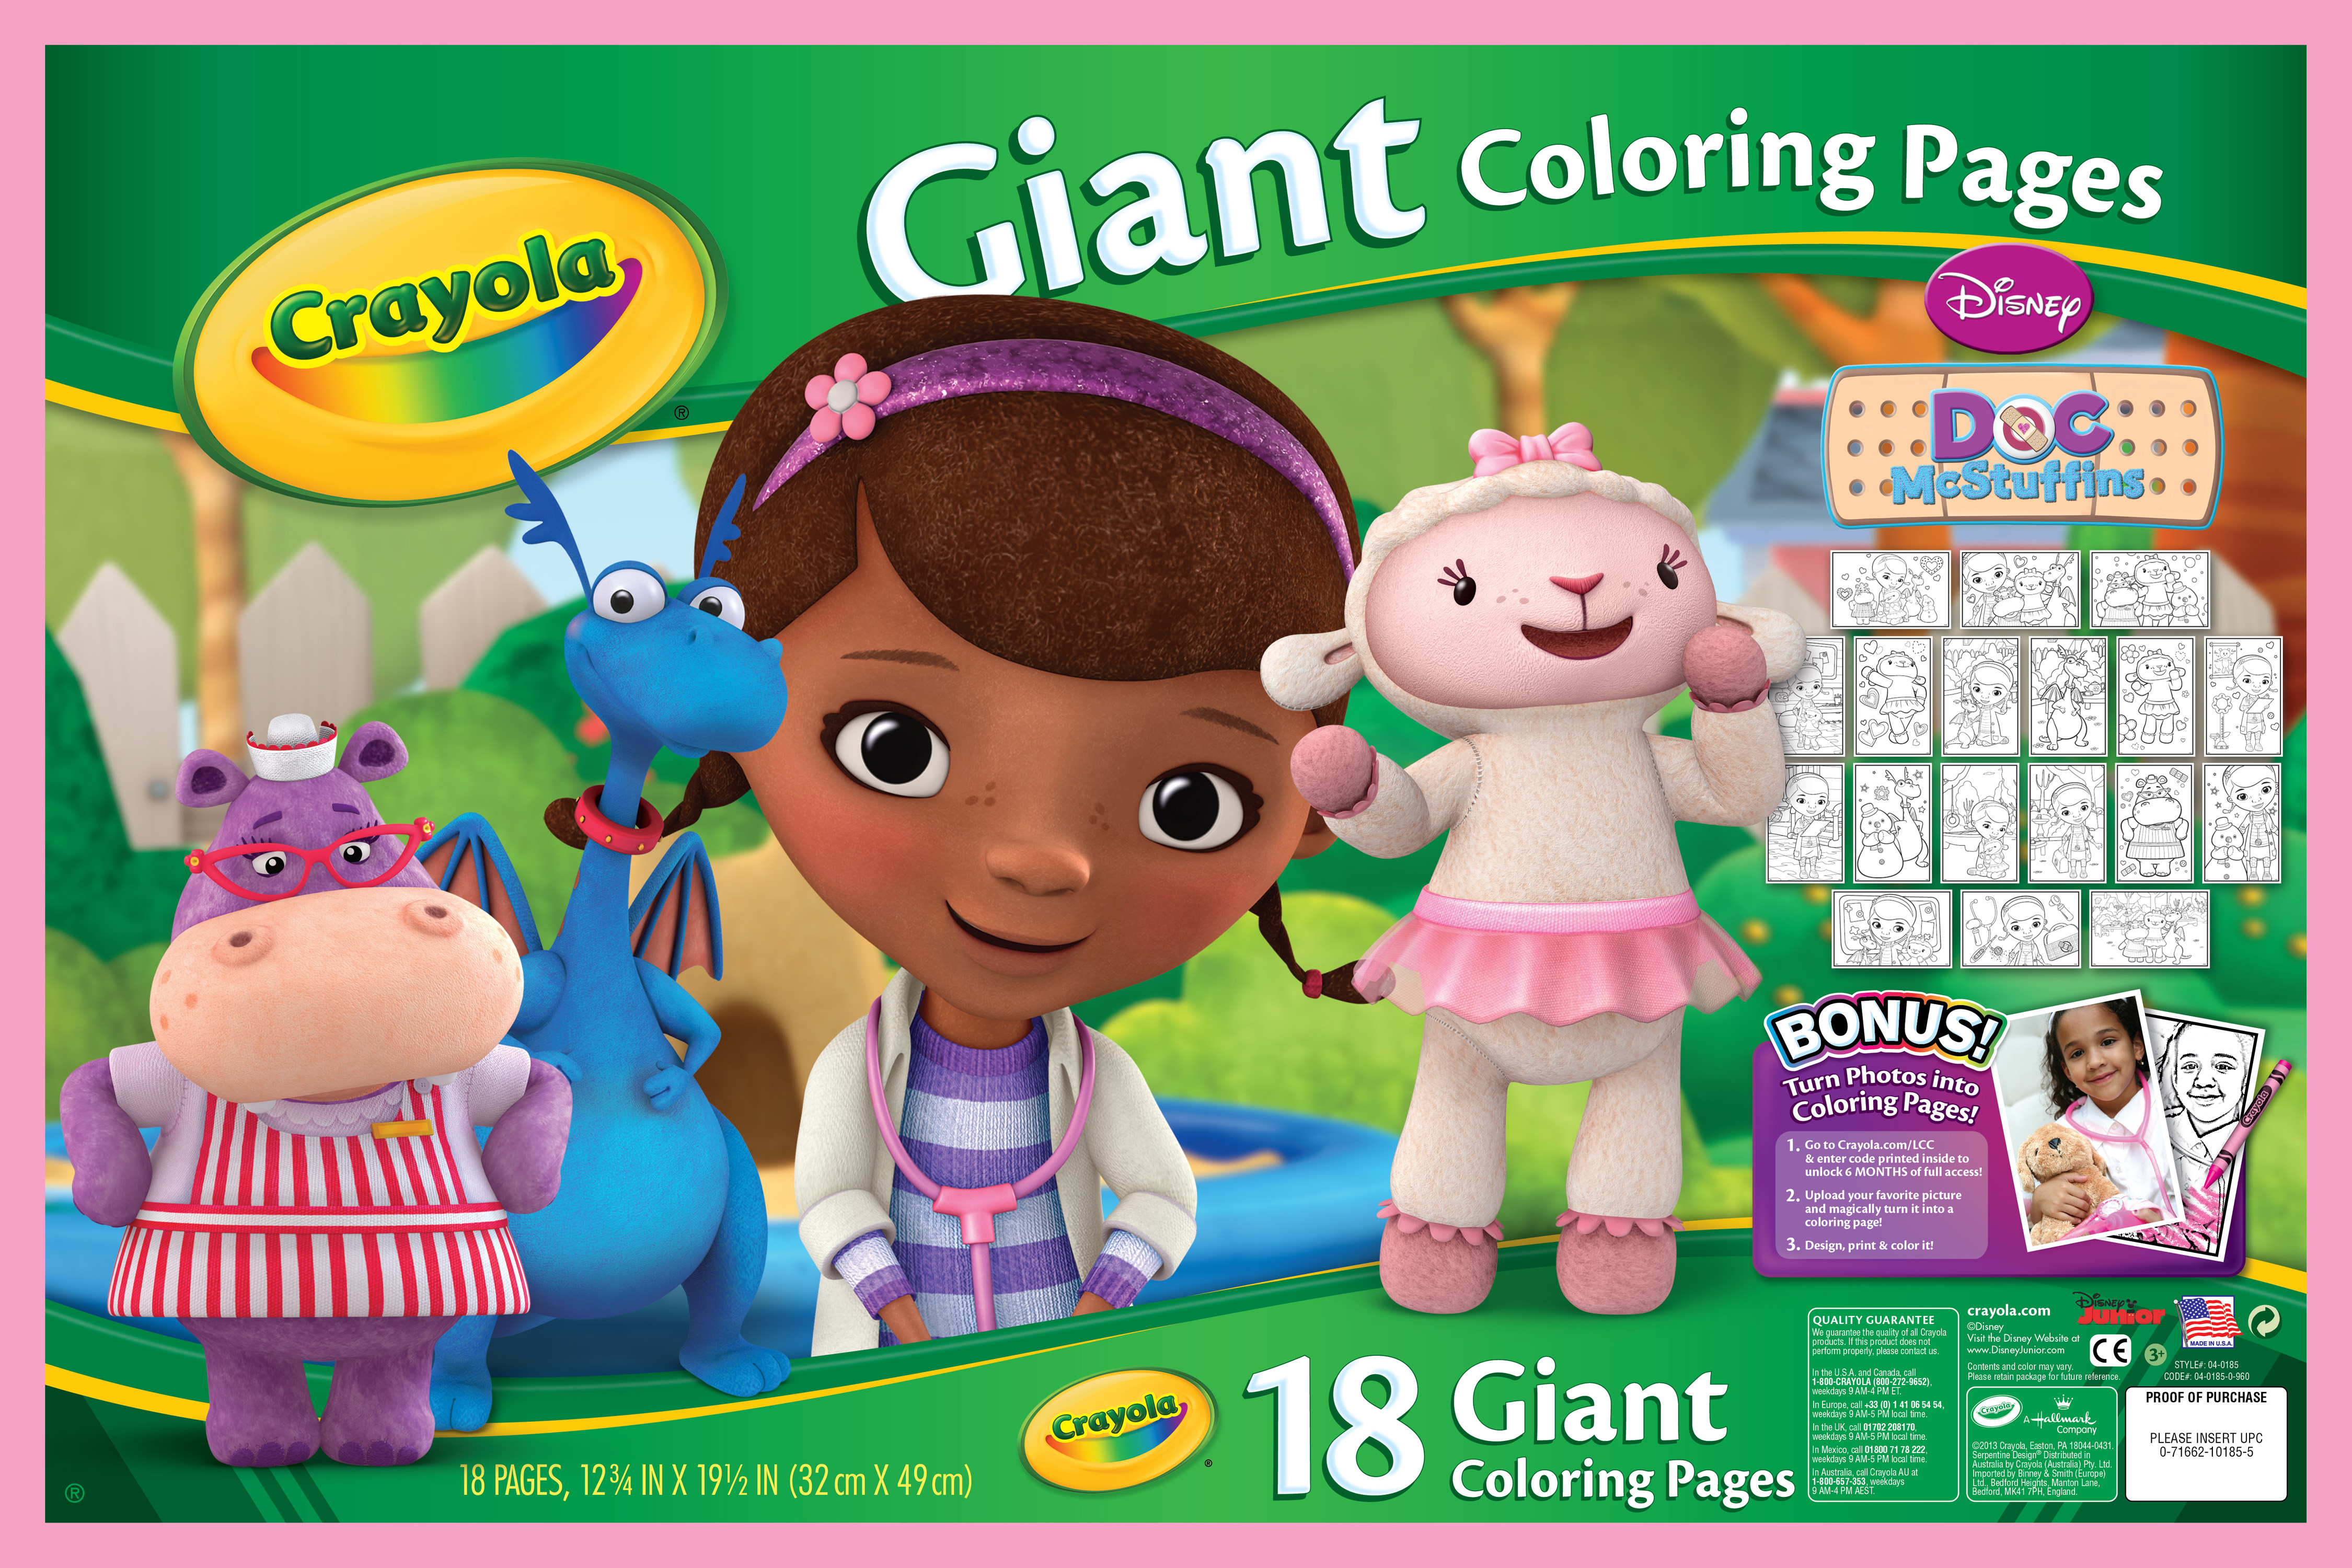 Giant Coloring Pages - Doc McStuffins | Crayola